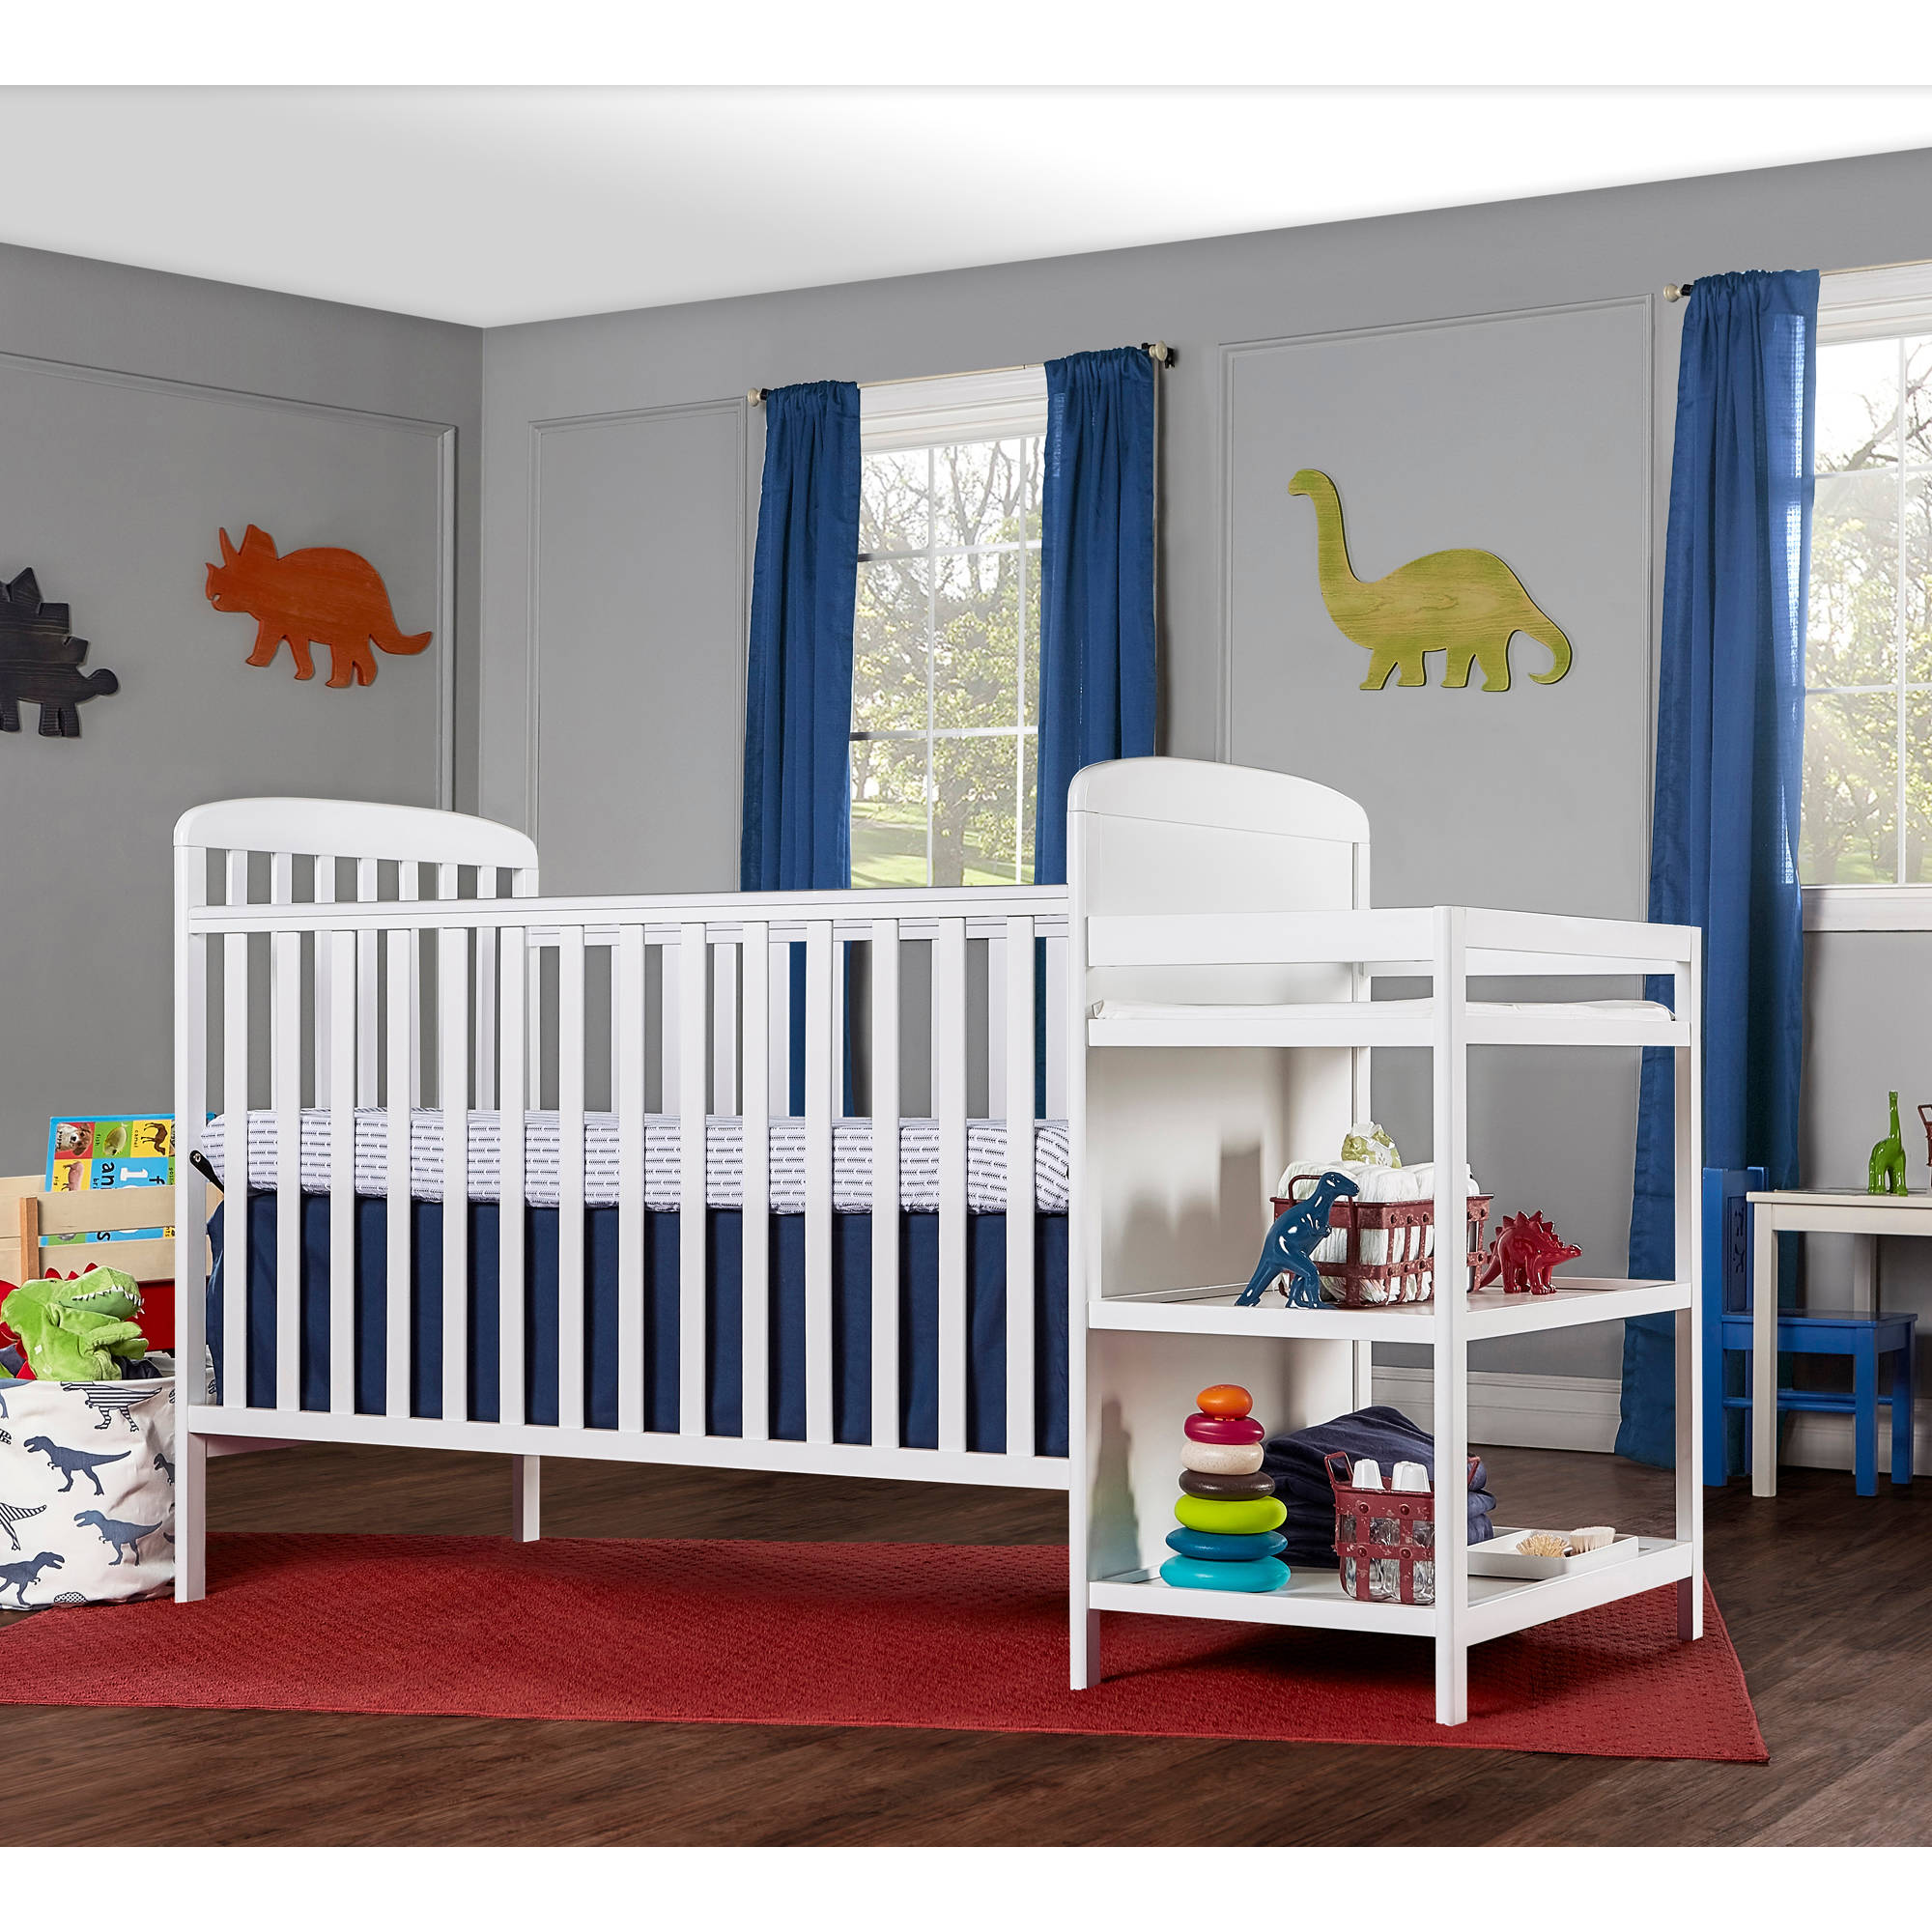 Dream On Me Anna 4-in-1 Full Size Crib and Changing Table, White - image 5 of 10